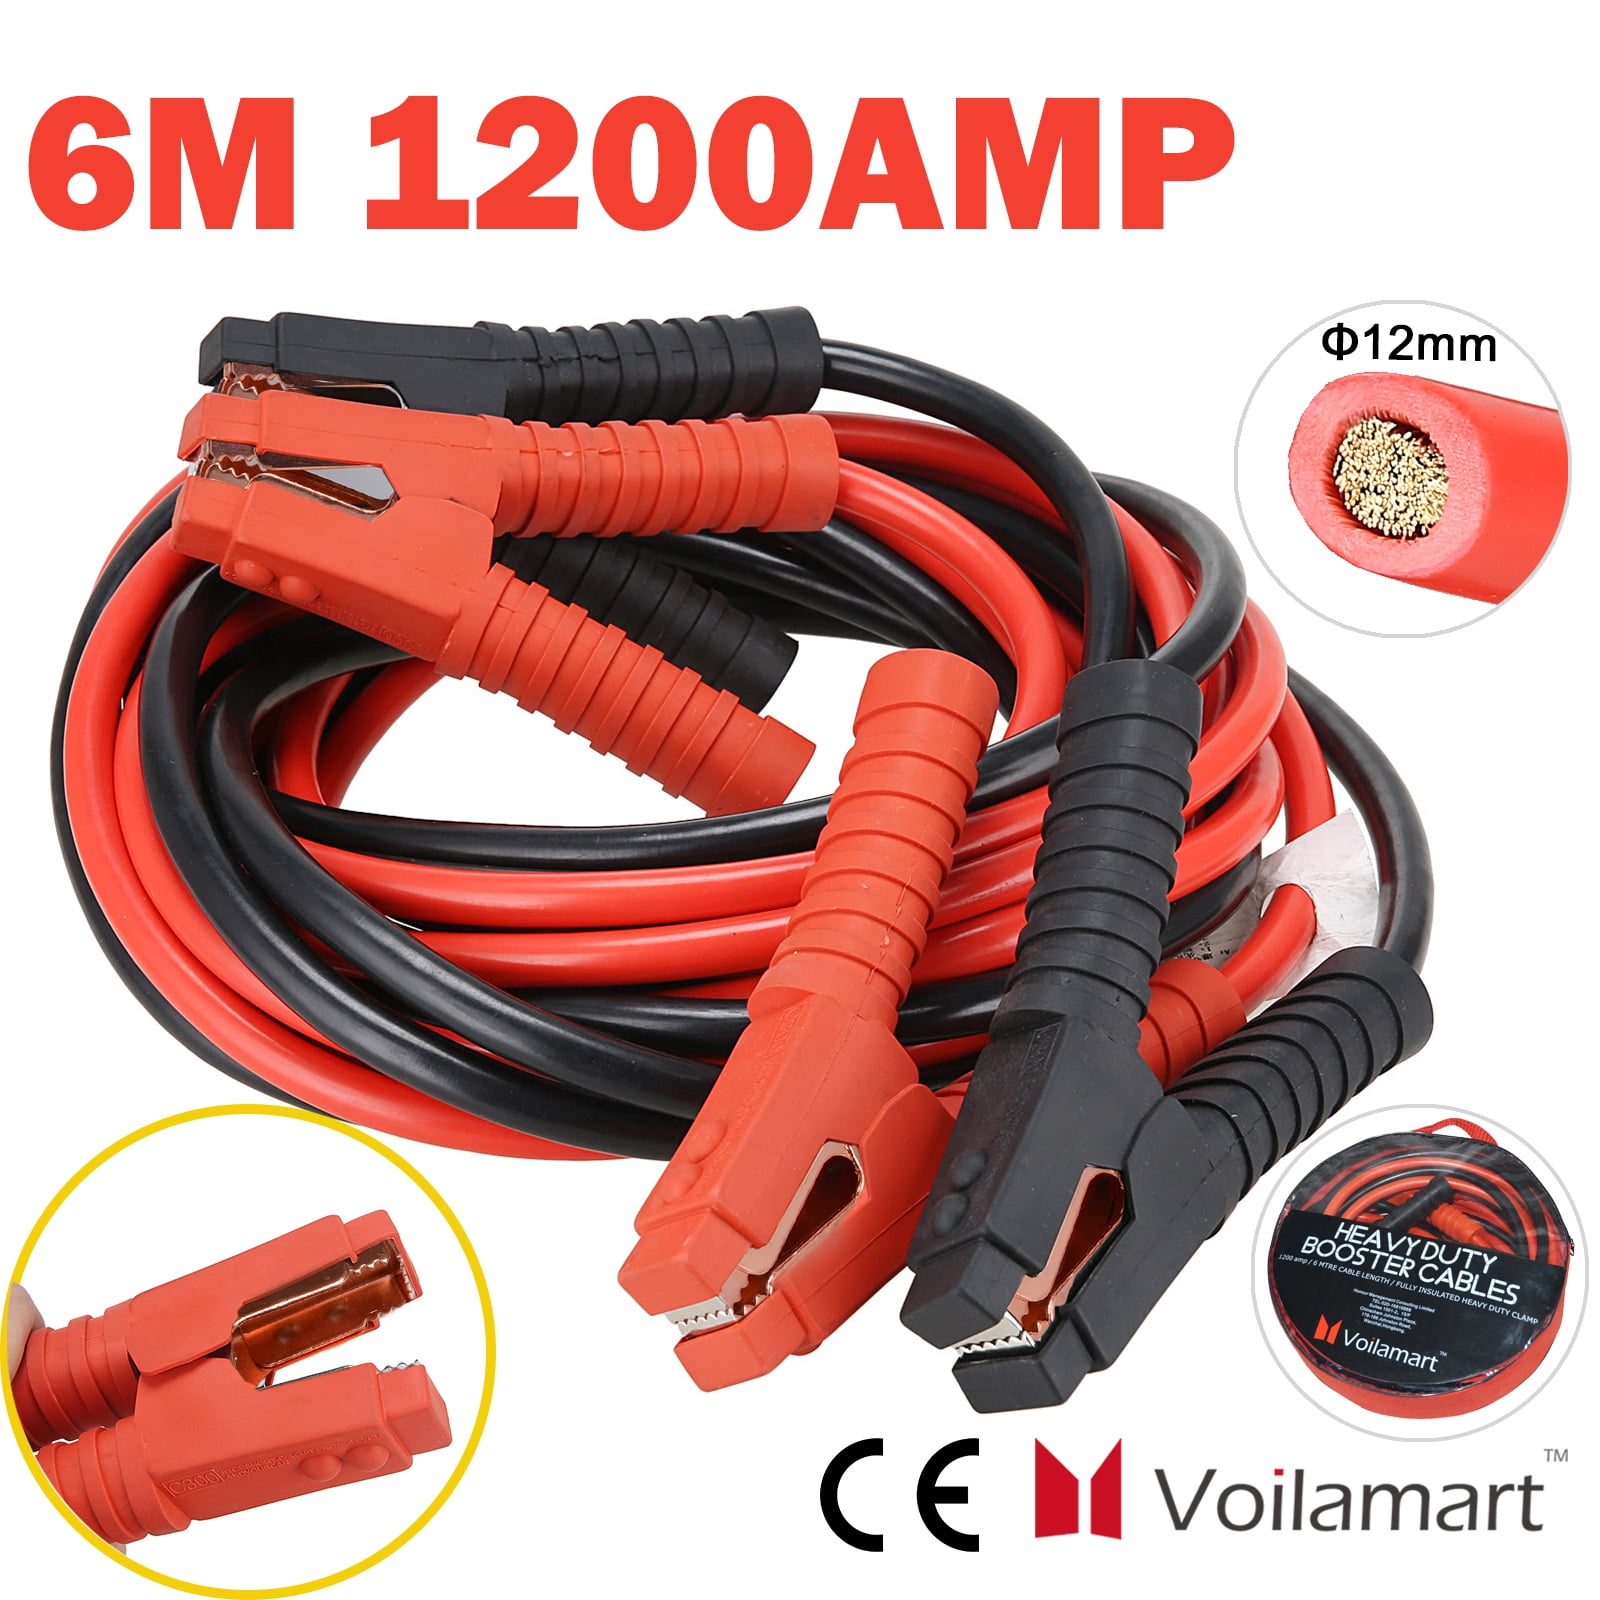 Auto Spark 1200AMP Heavy Duty Jump Leads 8F Start Booster Battery Cables Car Van